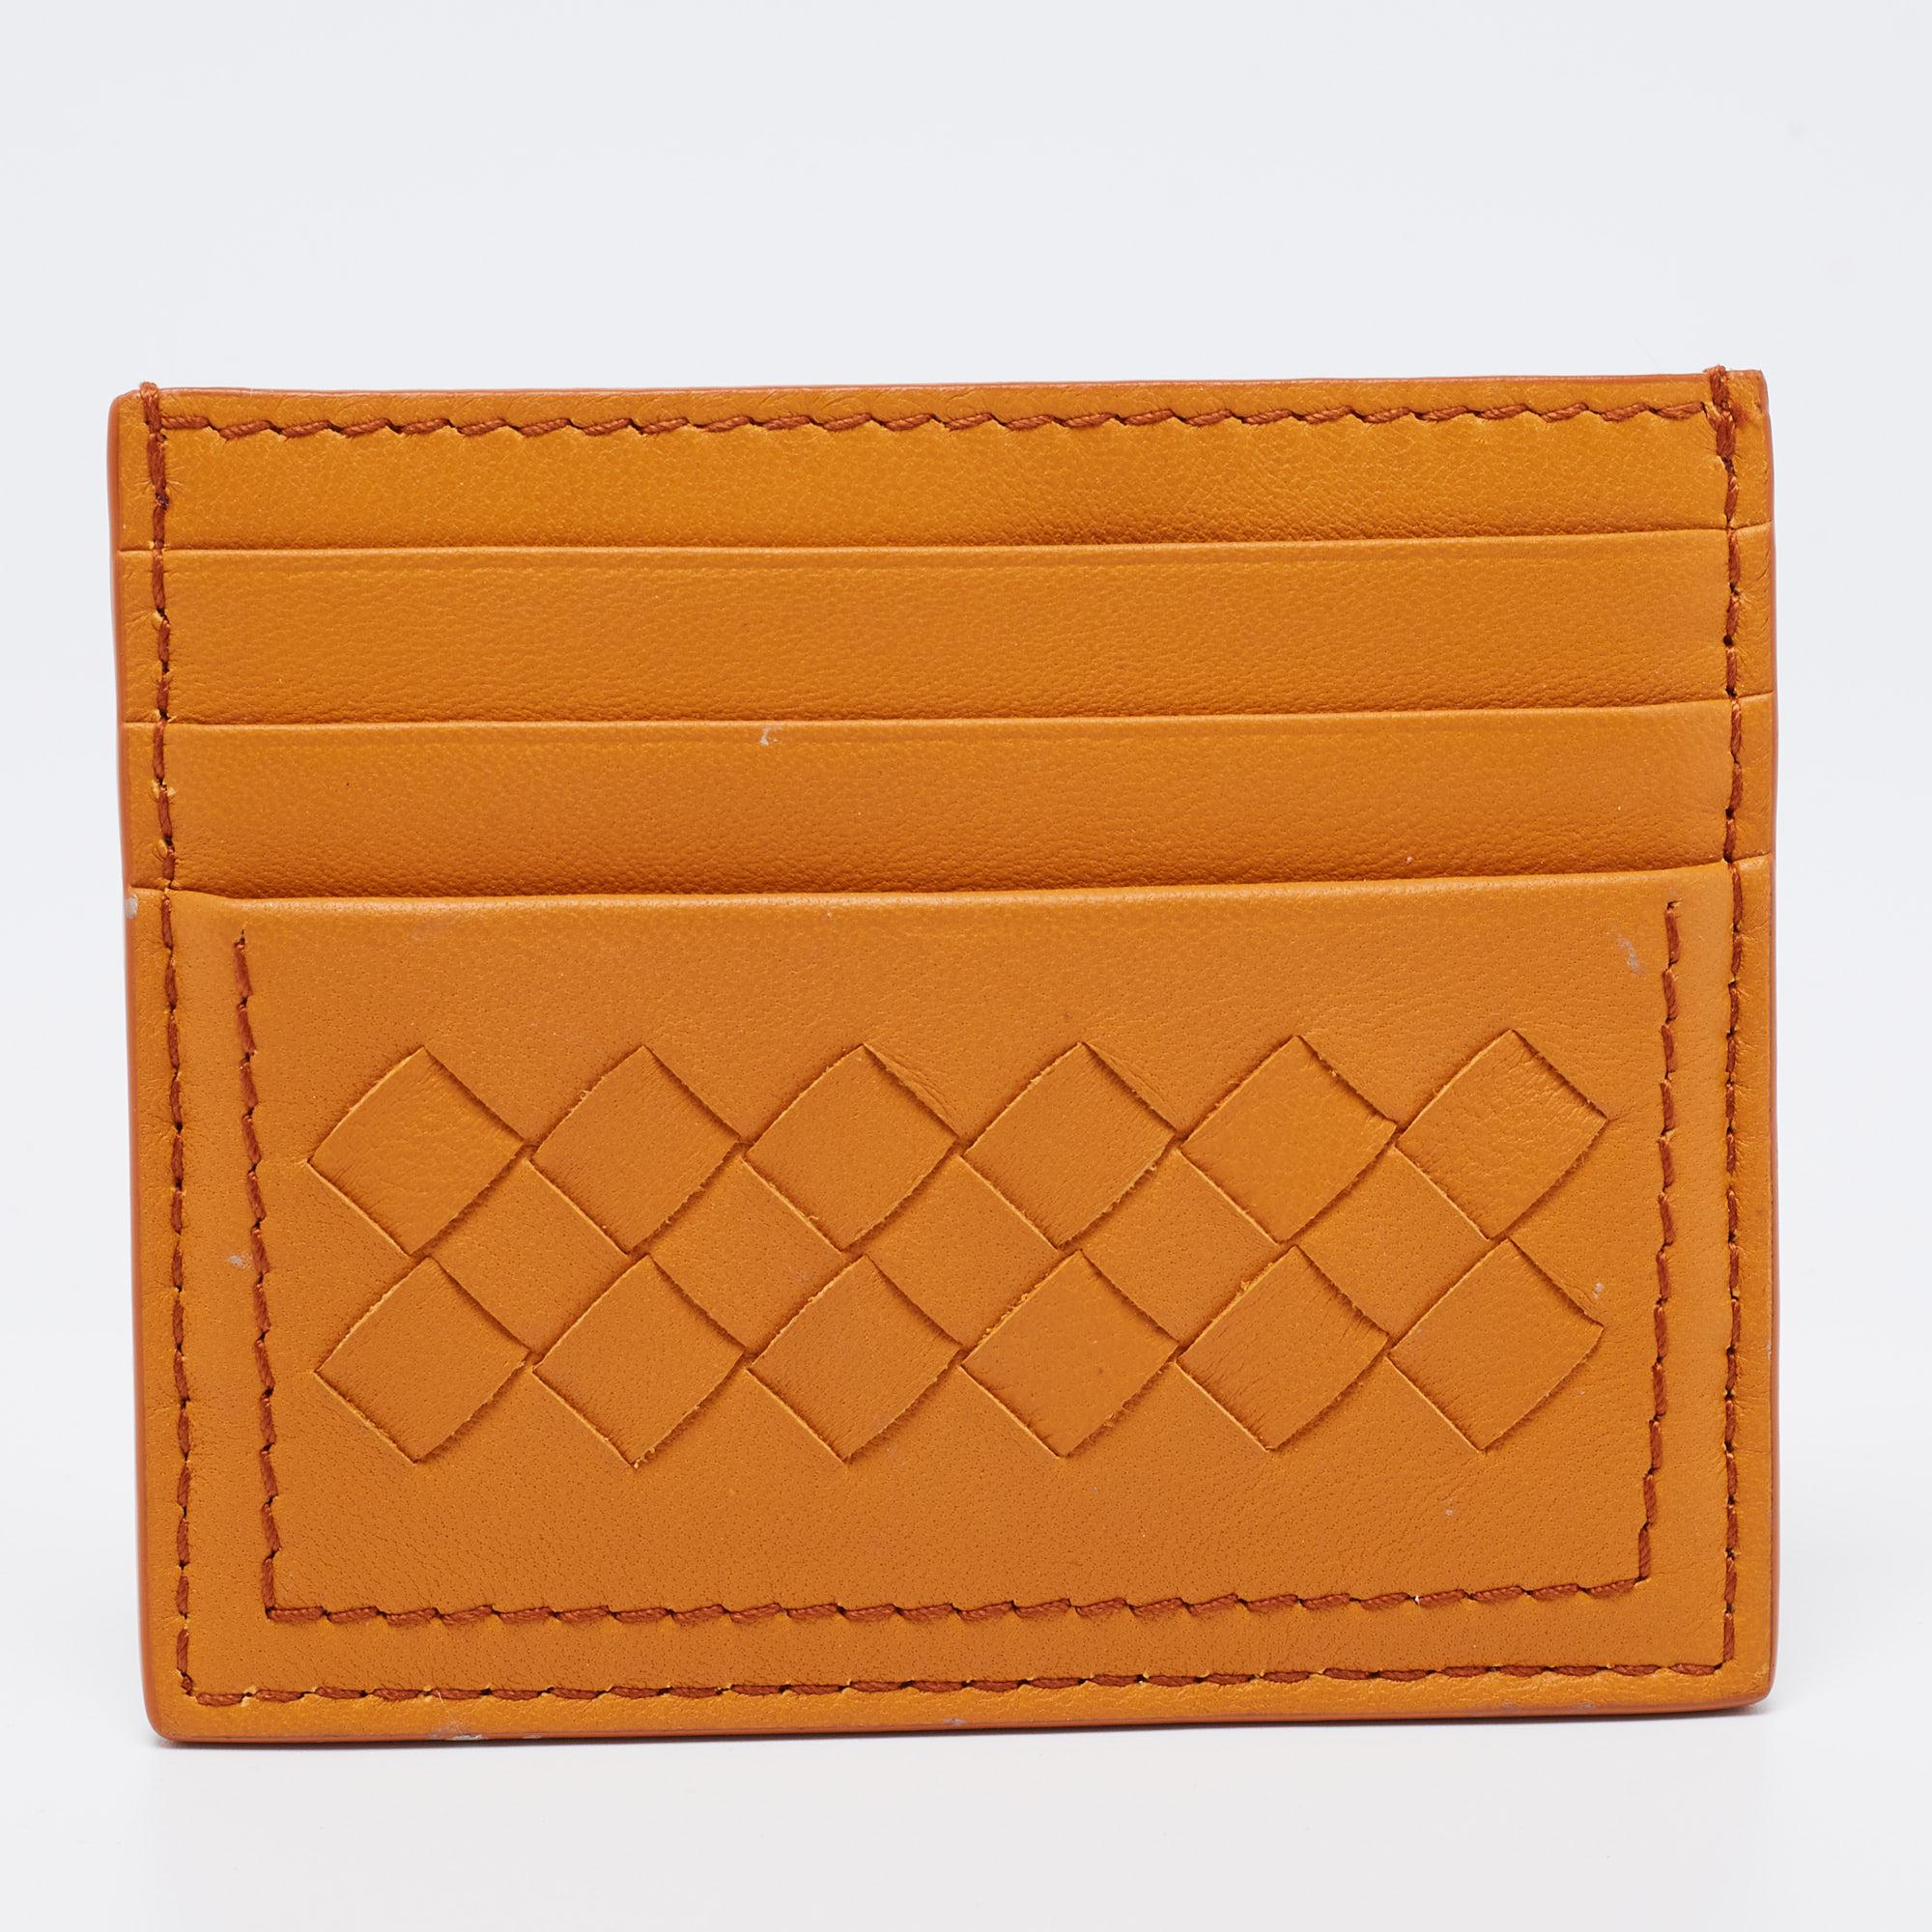 Crafted from leather, this Bottega Veneta card holder has the Intrecciato motif and multiple slots where you can neatly carry your cards. It also features a butterfly on the front.

Includes: Original Dustbag, tag